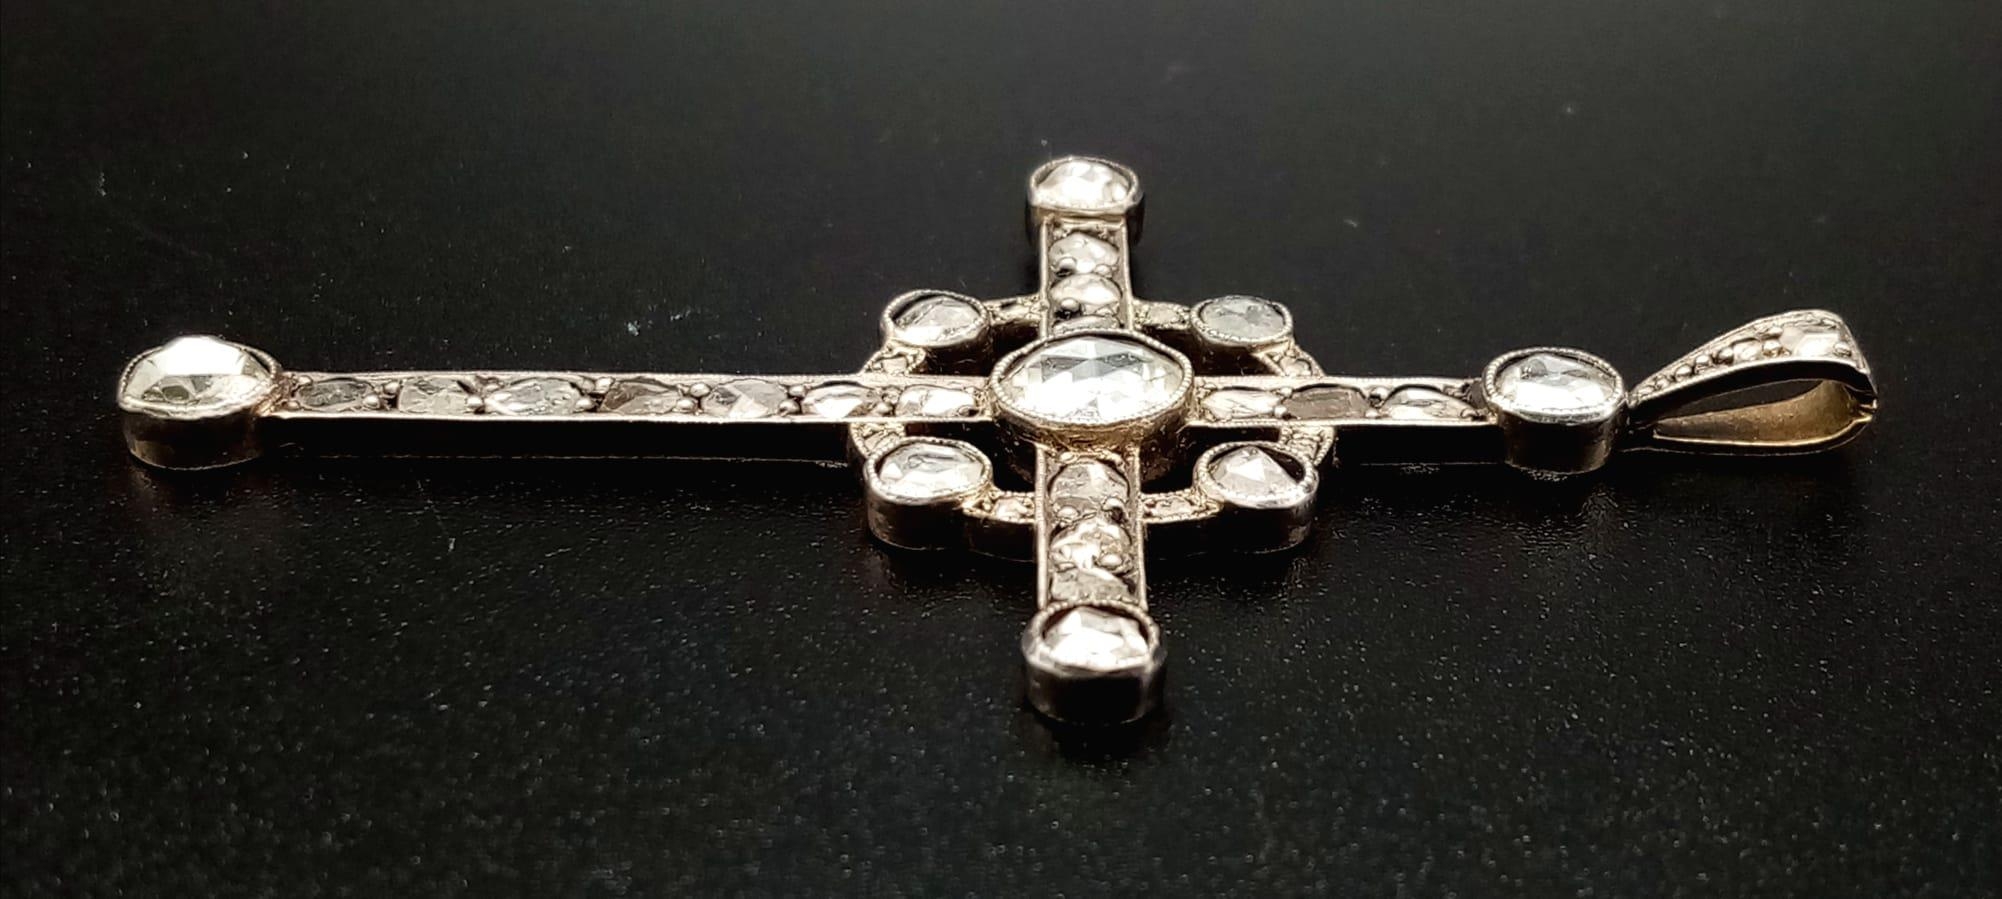 An Antique Art Deco 18K Gold and Diamond Cross Pendant. 2ct of old cut diamonds. 5.58g total weight. - Image 3 of 5